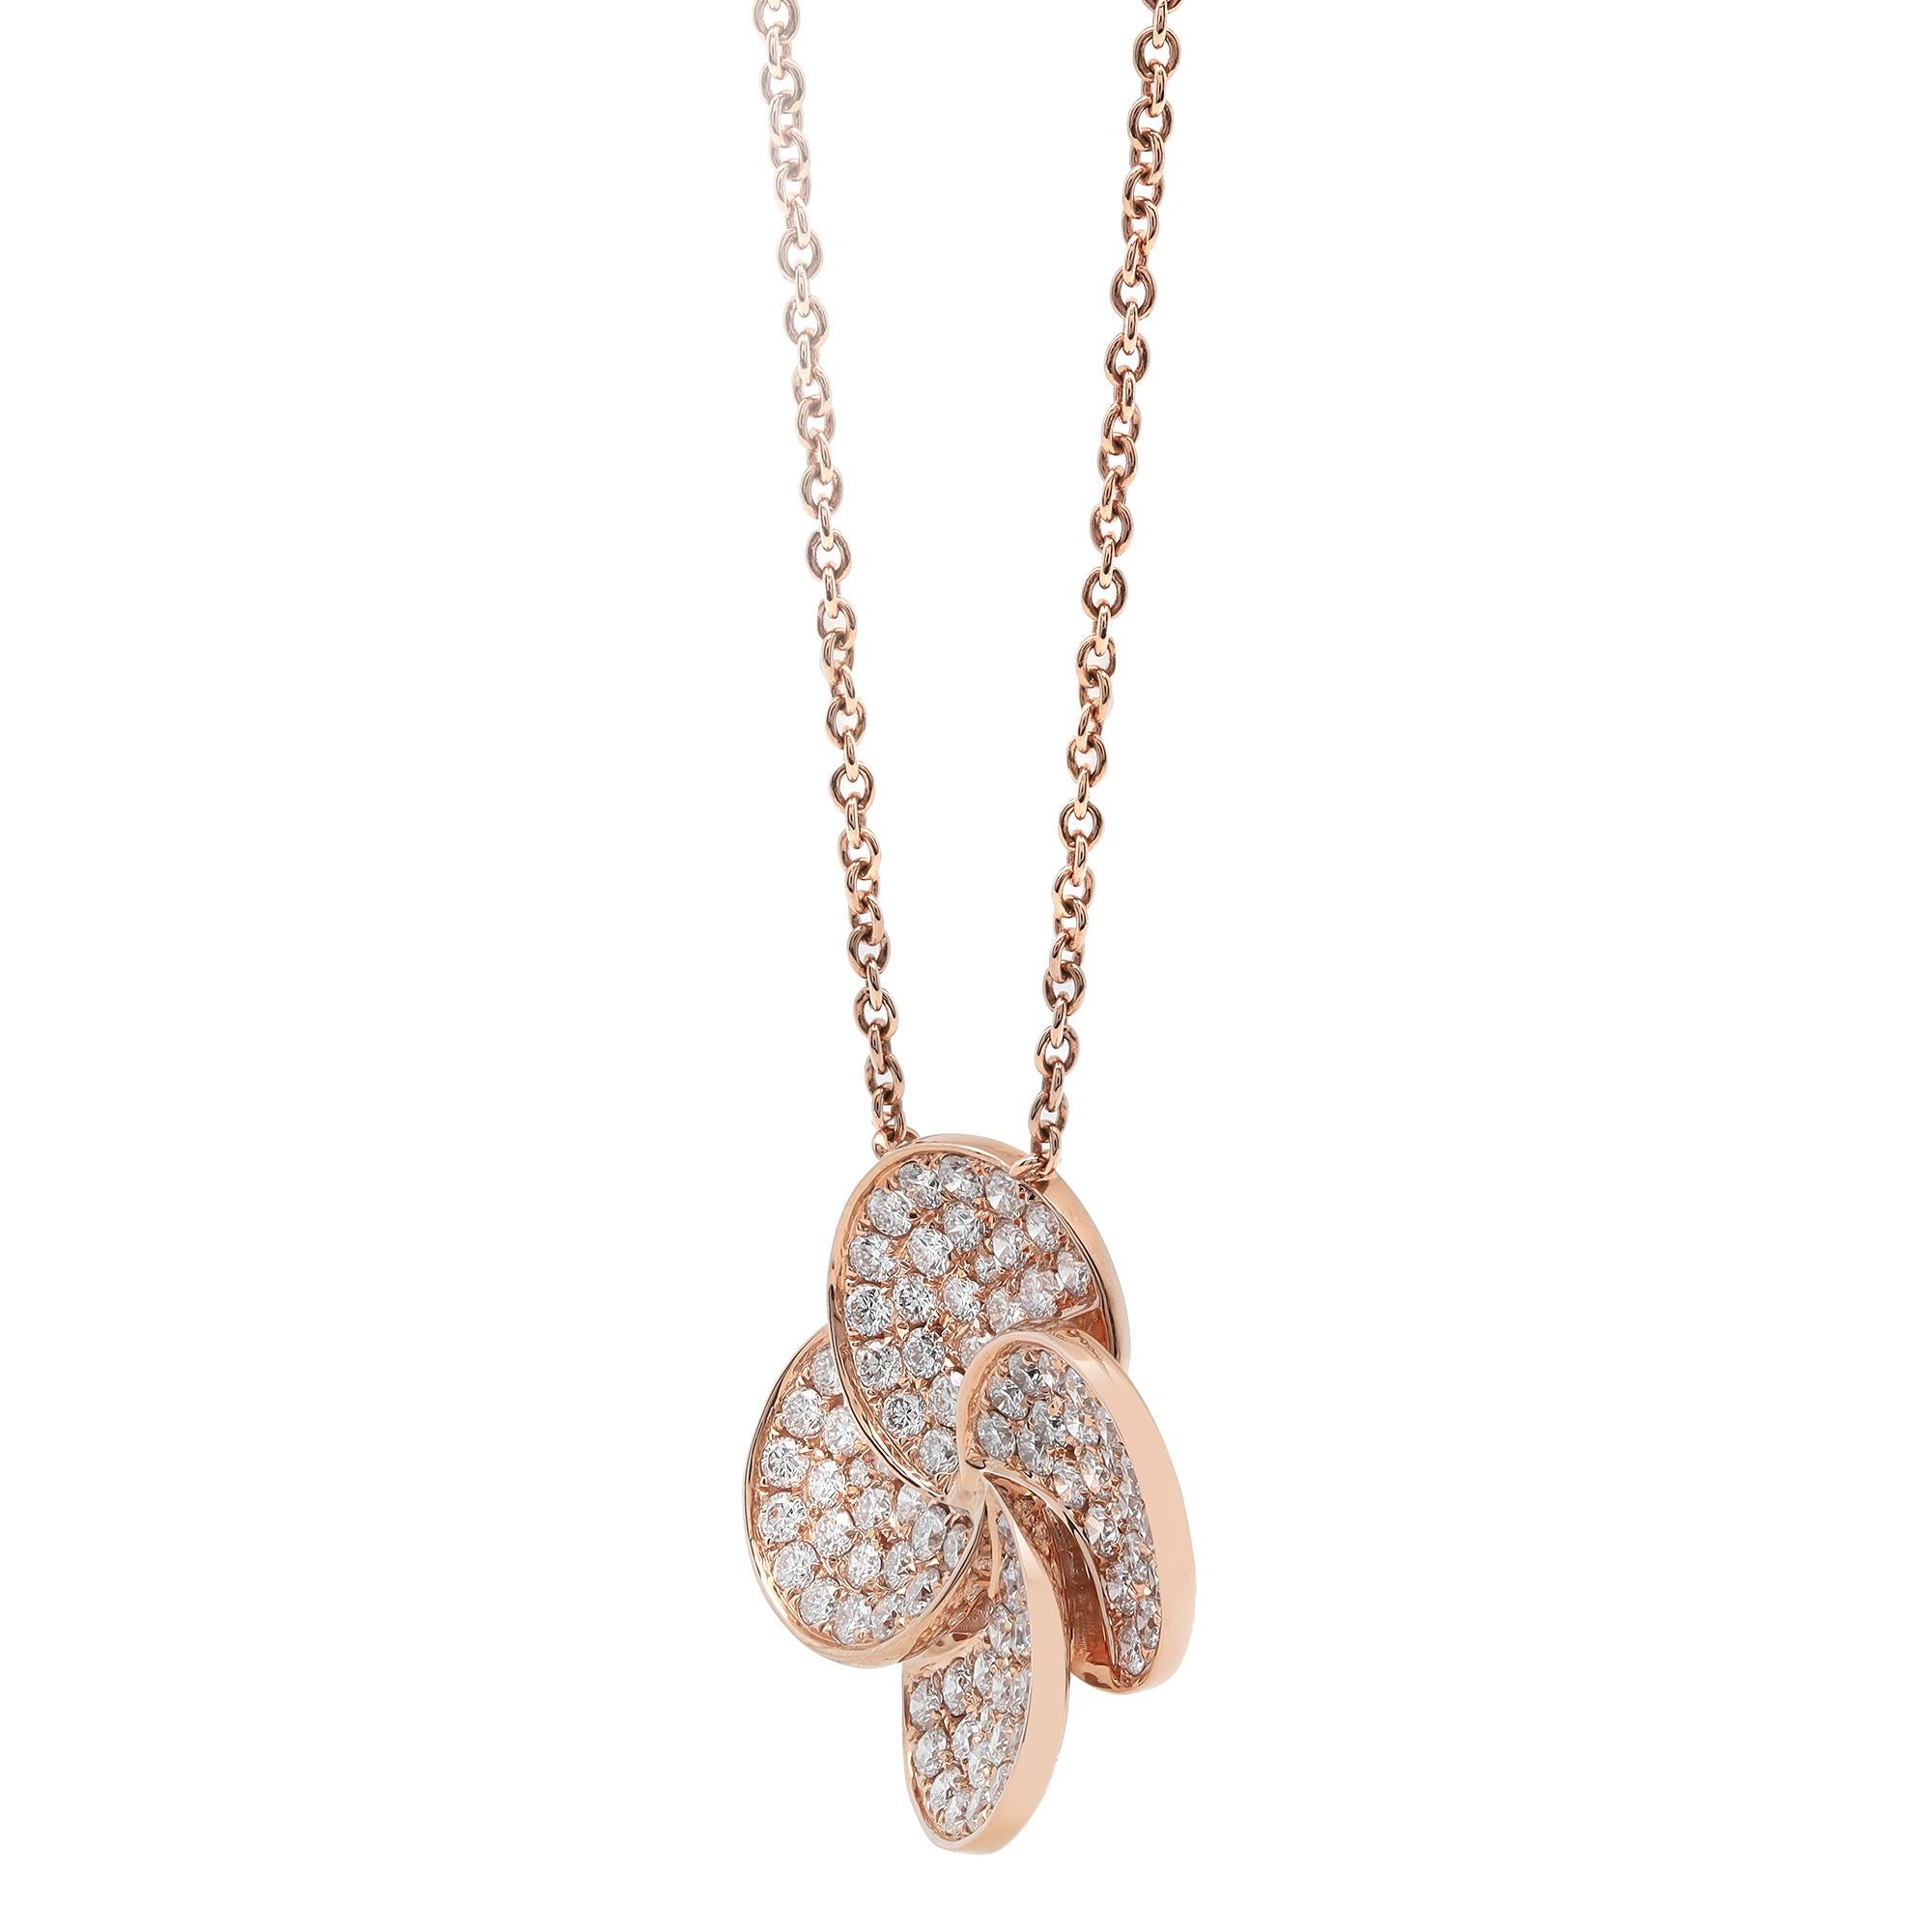 This fabulous dazzling diamond flower pendant necklace is a perfect accent to every day and evening look and gives a touch of chic to any ensemble you pair it with. It features pave set round brilliant cut diamonds weighing 1.77 carats. Diamond